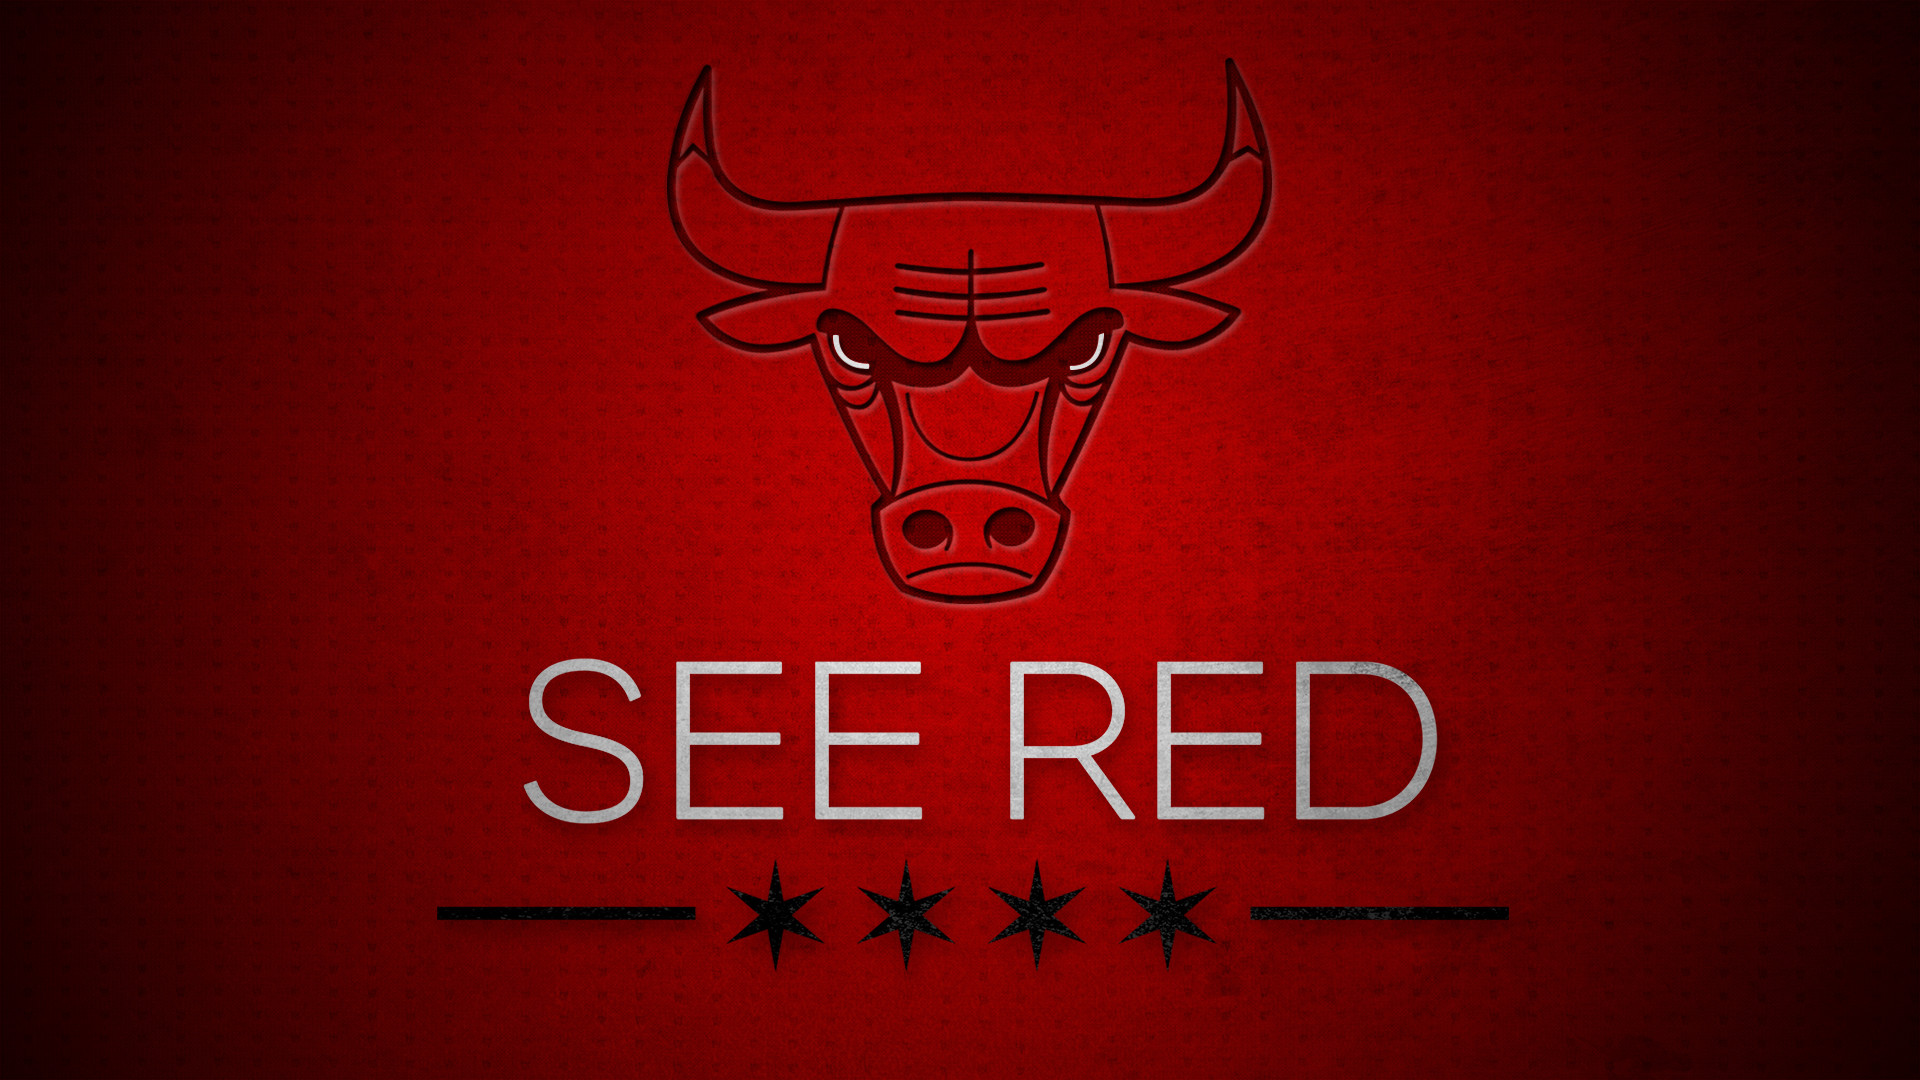 1920x1080 awesome bulls see red wallpaper -#main